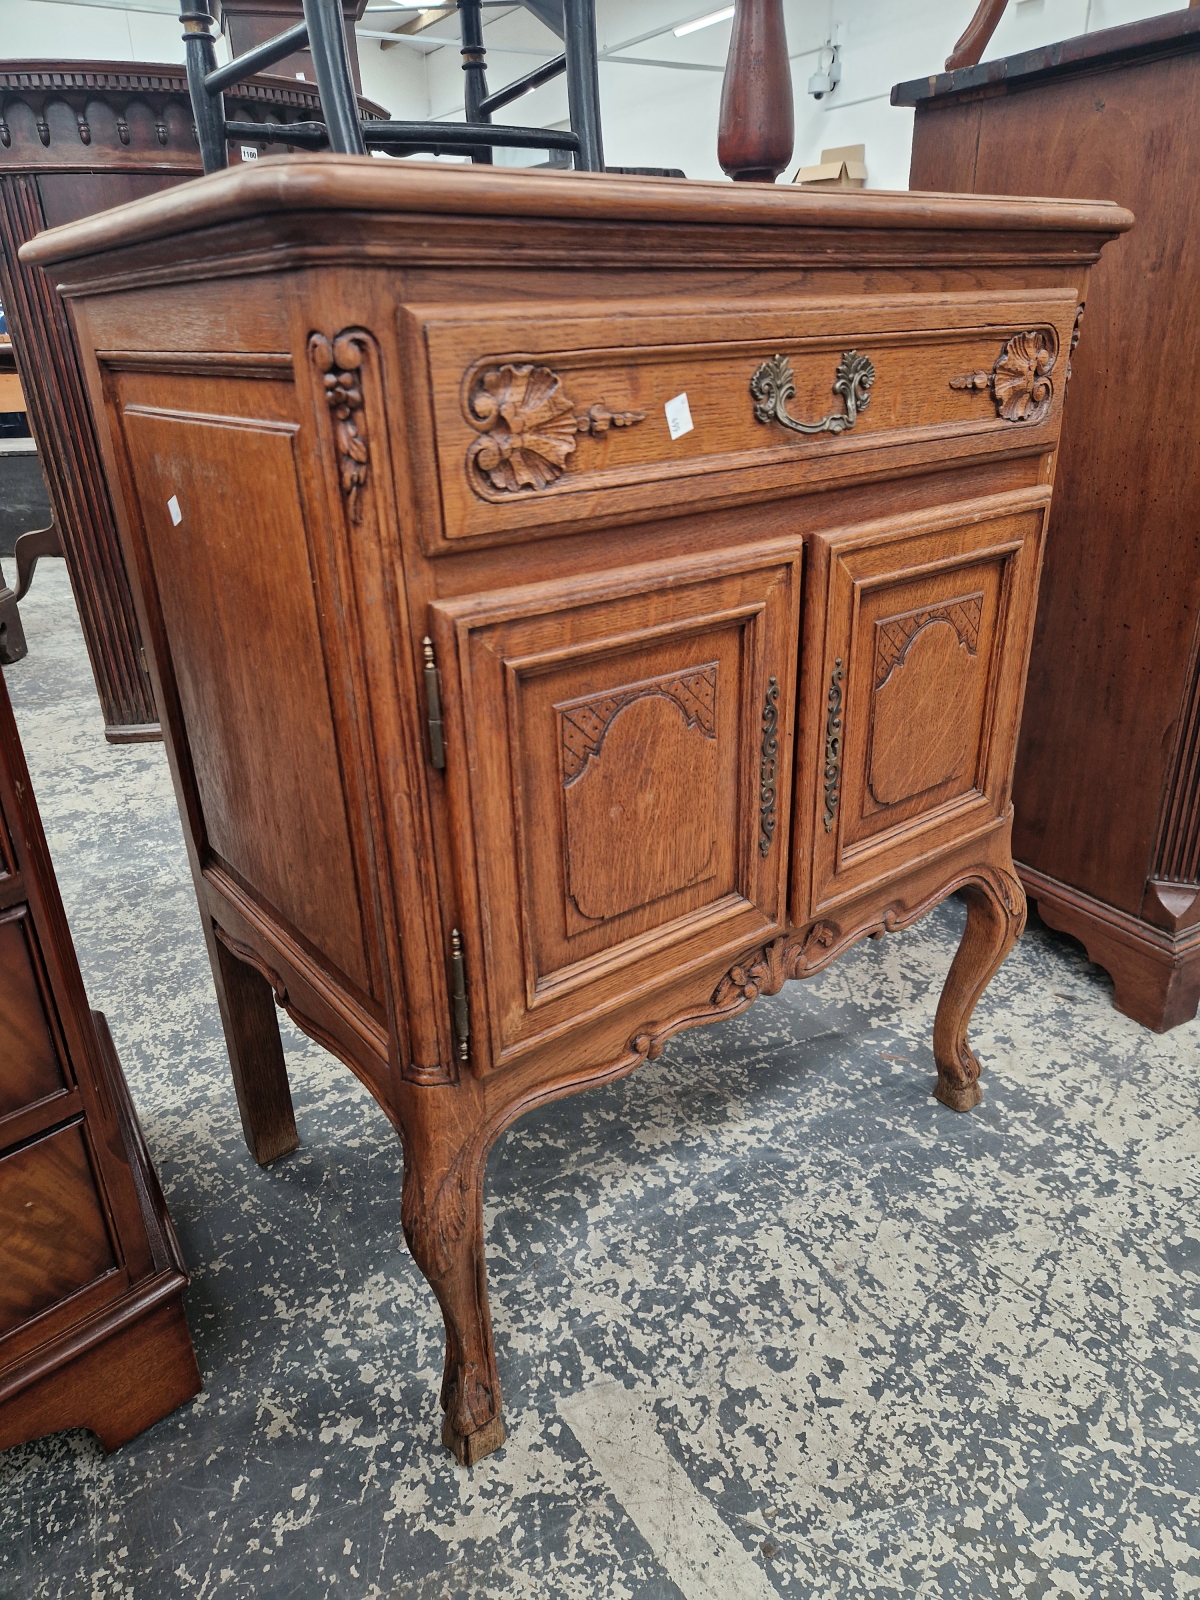 AN OAK SIDE CABINET WITH A DRAWER ABOVE PANELLED DOORS, CABRIOLE FRONT LEGS ON CARVED FEET - Image 2 of 4